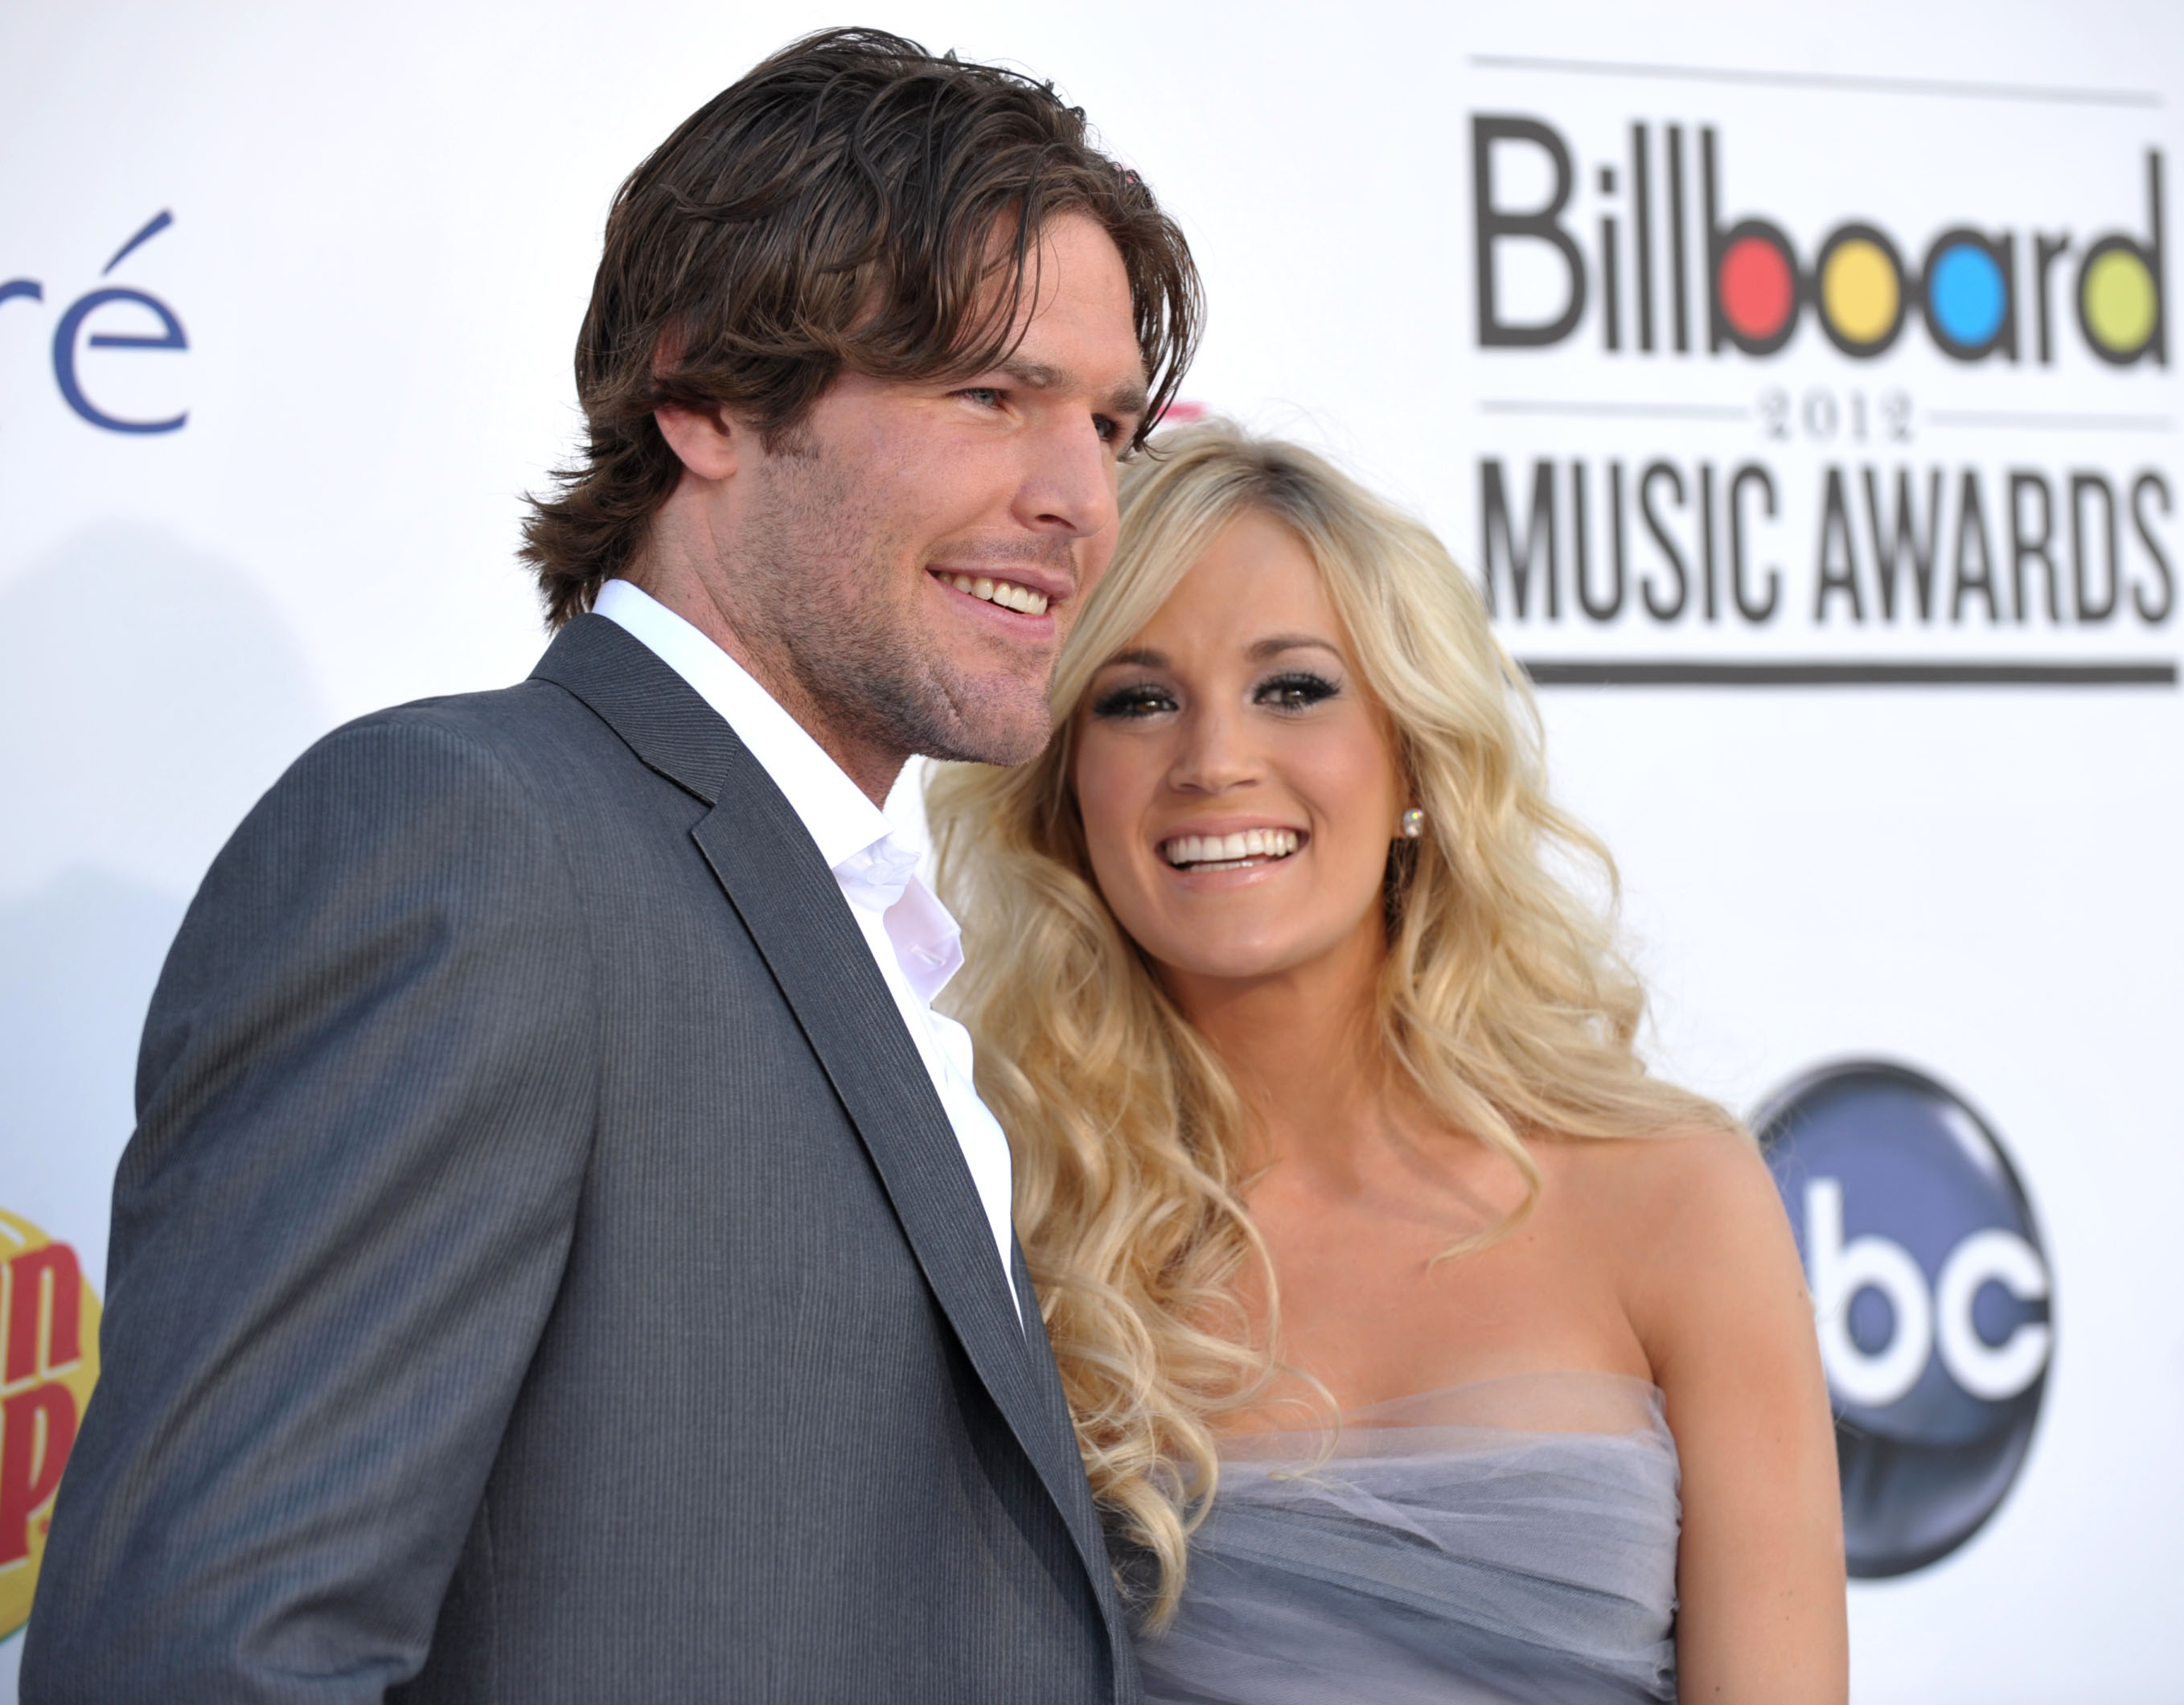 Carrie Underwood & Mike Fisher's CMA Awards Night Out Is Extra Special